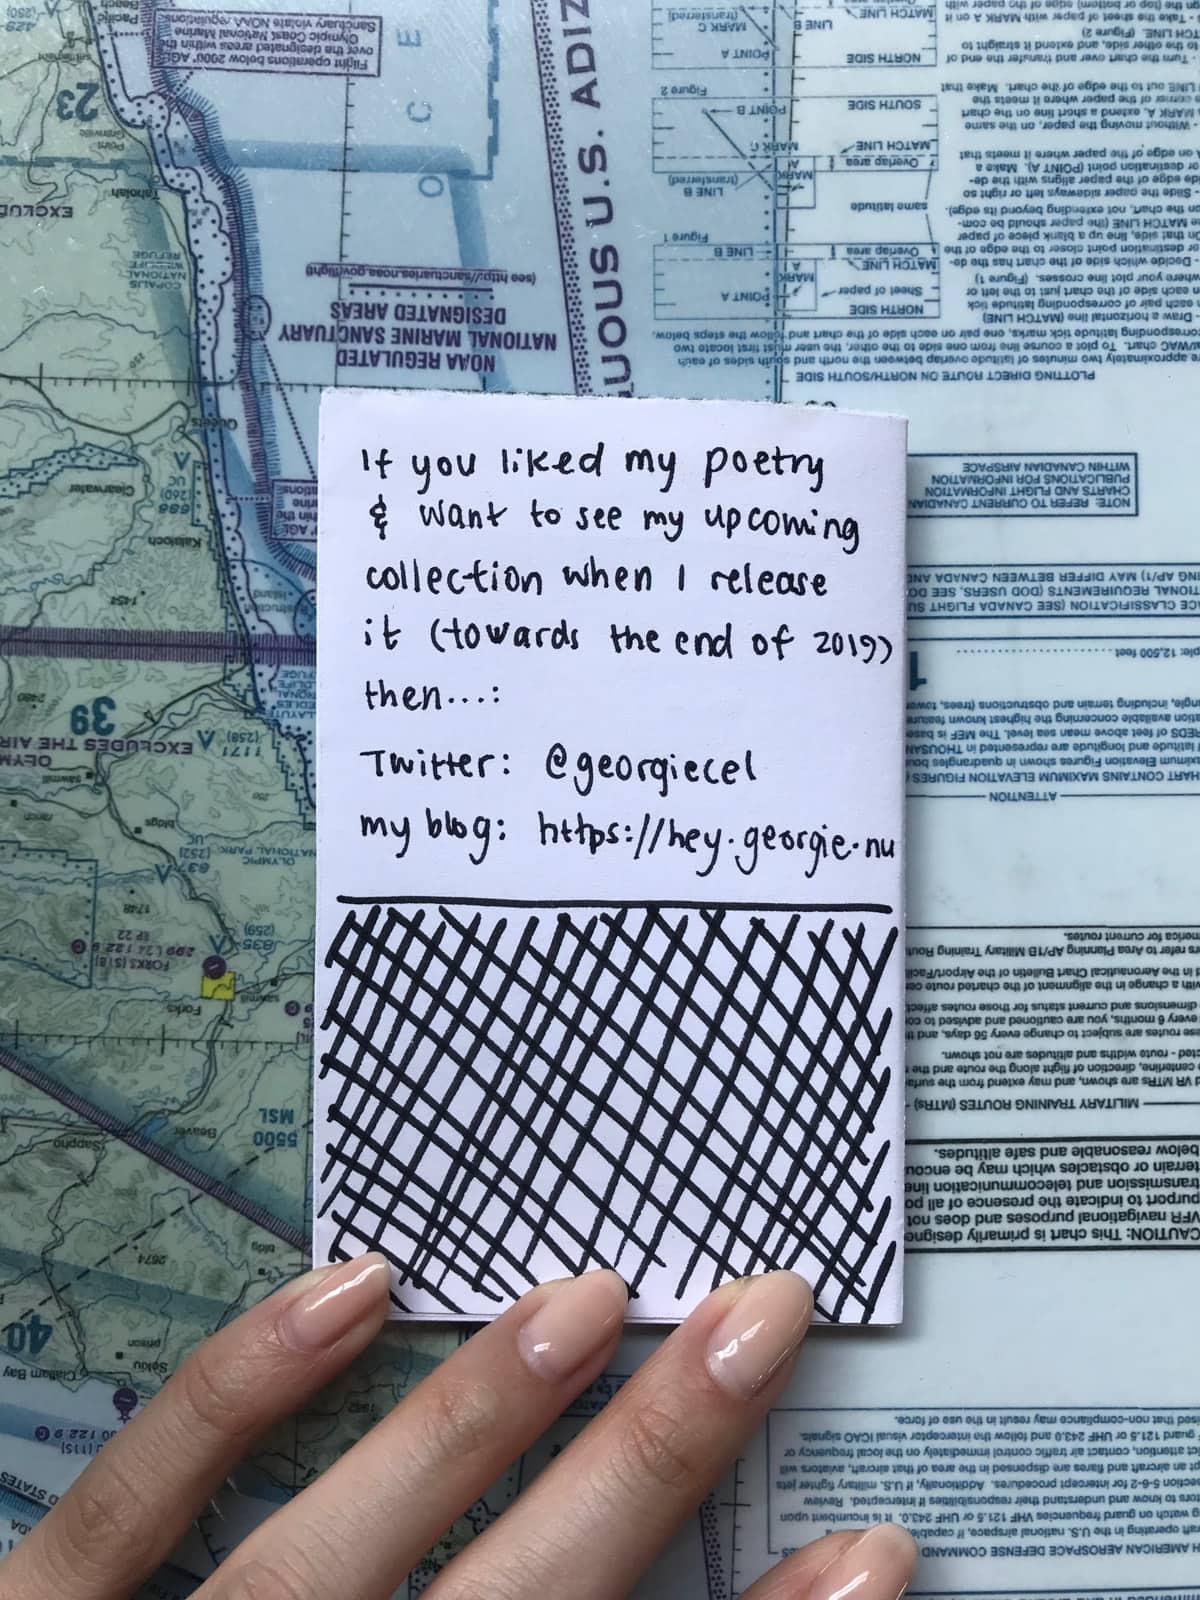 The outside back cover of a zine with a farewell message and contact information from the author